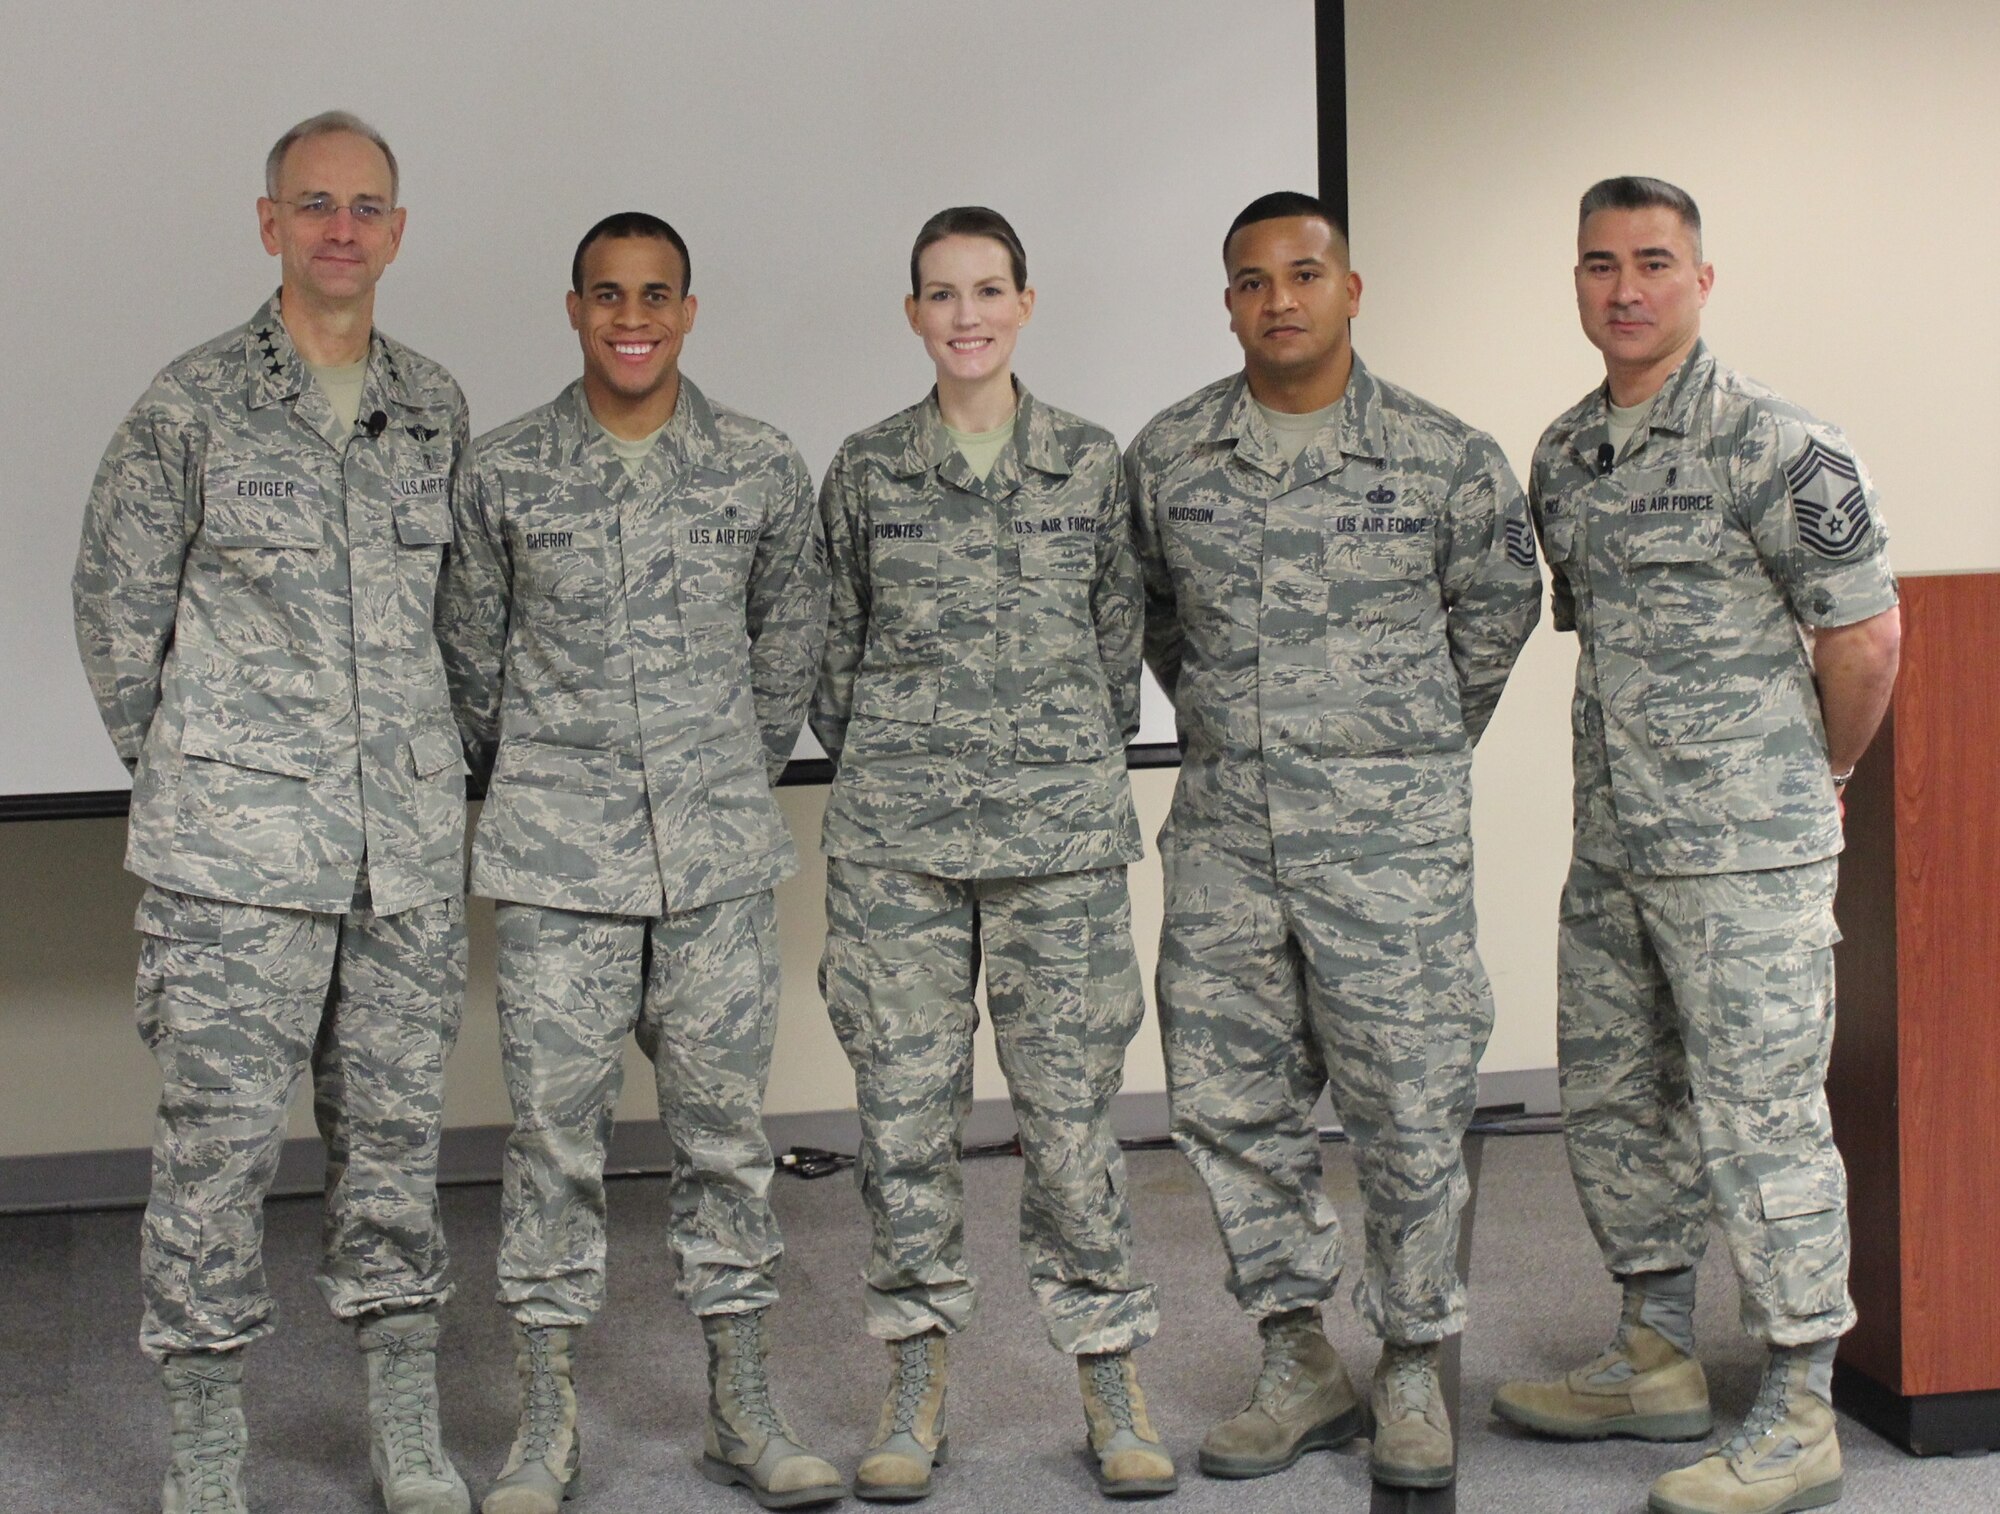 Lt. Gen. Mark Ediger, Air Force Surgeon General, and Chief Master Sgt. Jason Pace, Chief, Medical Enlisted Force, saluted three medical Airmen who earned the Outstanding Airman of the Year Award at the 2015 Senior Leadership Workshop at the National Conference Center in Leesburg, Va., on November 19. From left to right: Lt. Gen. Ediger, Senior Airman Allen R. Cherry III, Staff Sgt. Lindsey H. Fuentes, Tech. Sgt. Troye L Hudson, and Chief Master Sgt. Pace. Both Senior Airman Cherry and Staff Sgt. Fuentes earned the award this year. Tech. Sgt. Hudson earned it last year but was deployed and unable to attend last year's workshop. (Photo by Jon Stock, USAF)